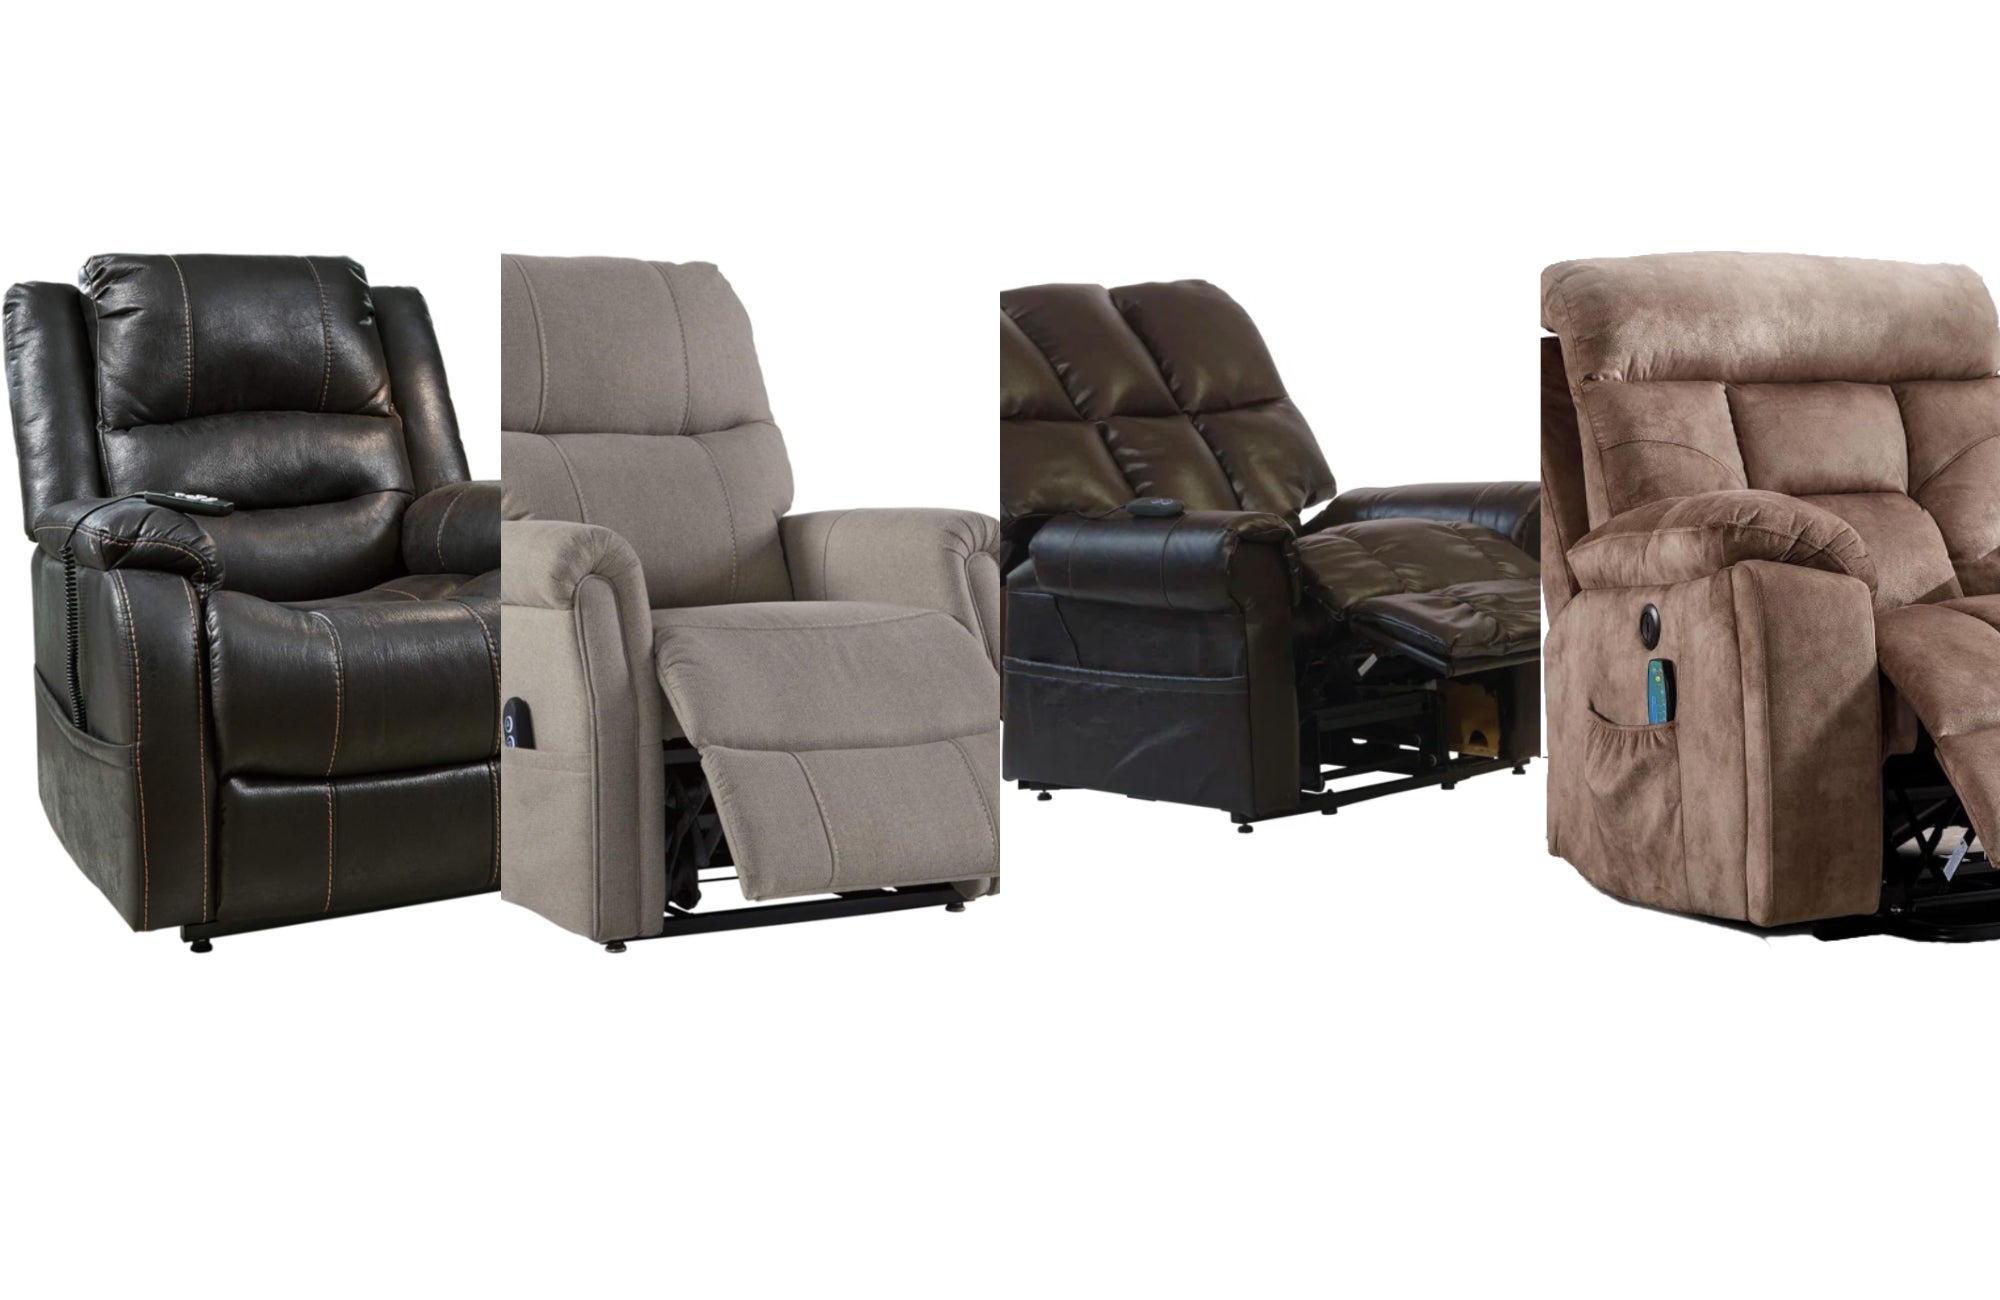 Consumer Reports: Top Picks for Best Recliner Chairs缩略图